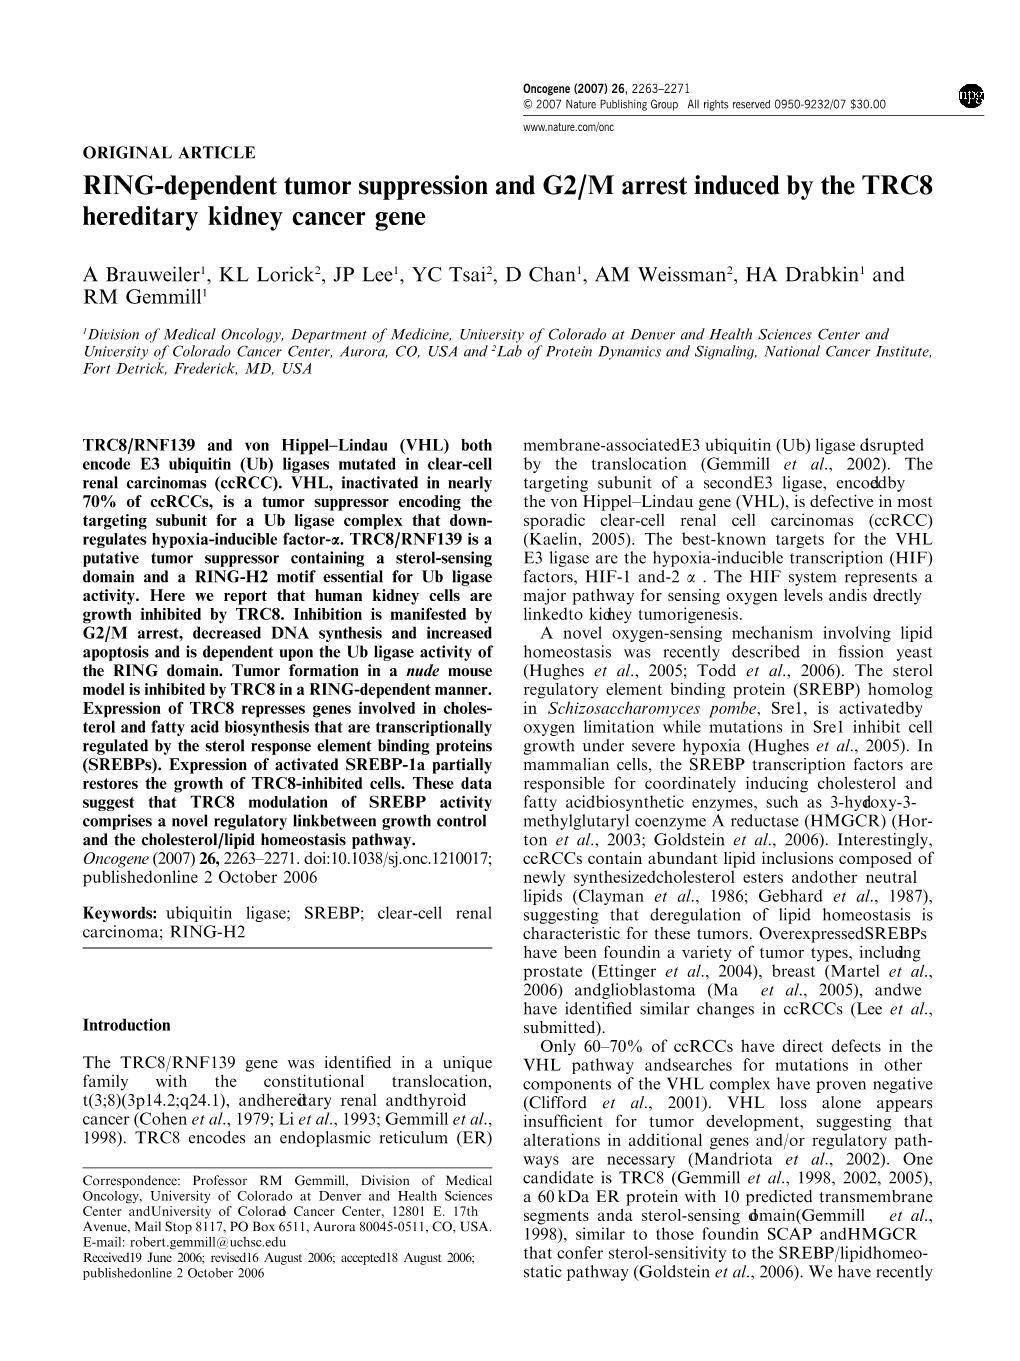 RING-Dependent Tumor Suppression and G2/M Arrest Induced by the TRC8 Hereditary Kidney Cancer Gene